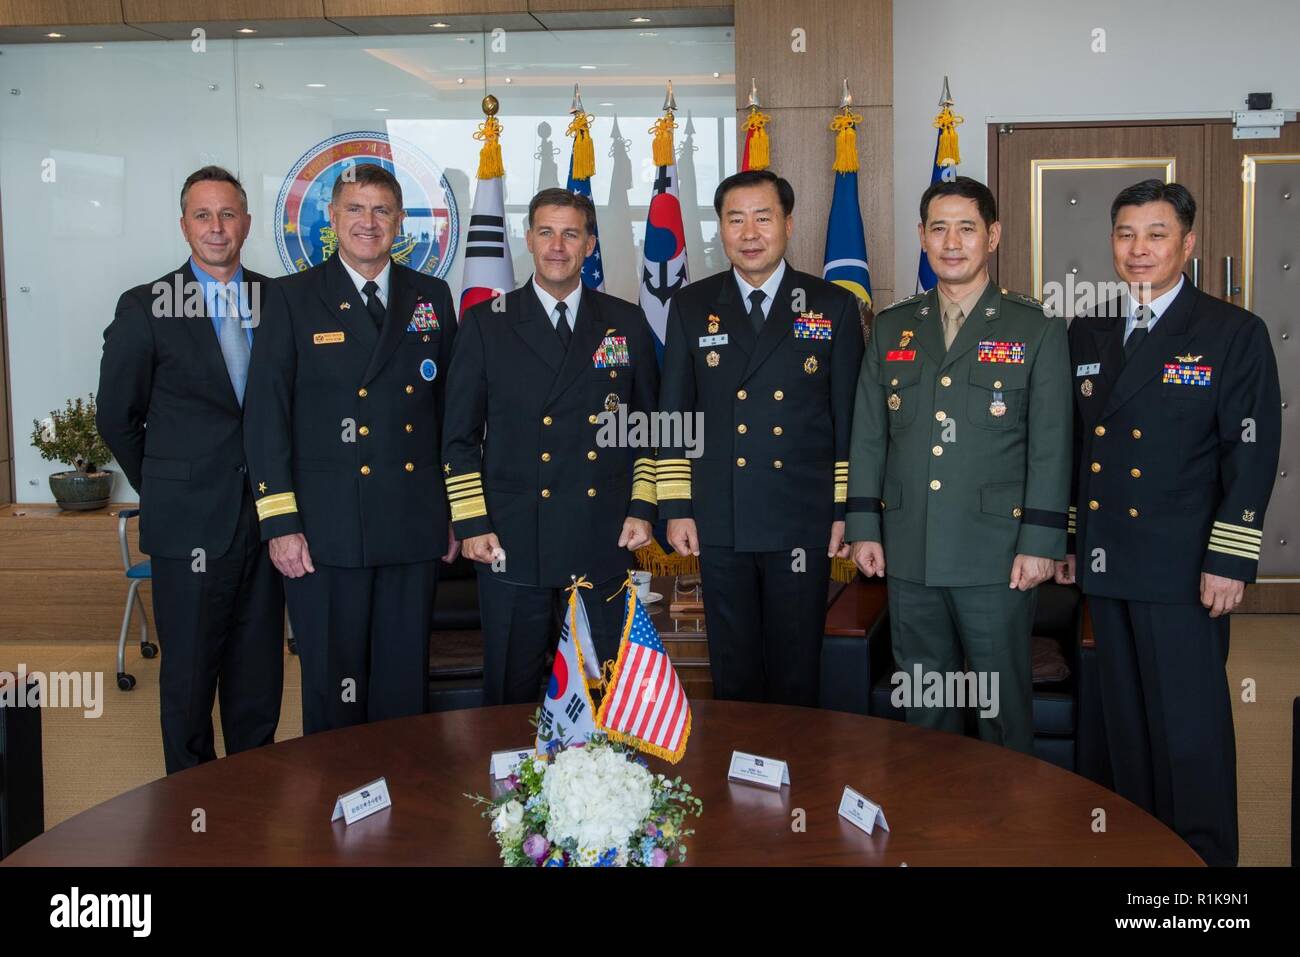 JEJU ISLAND, Republic of Korea, Republic of Korea (Oct. 11, 2018) Adm. John Aquilino (left center), commander, U.S. Pacific Fleet, poses for a group photo with Republic of Korea (ROK) Chief of Naval Operations (CNO) Adm. Sim, Seung-seob (right center) during an office call in Jeju. Aquilino is visiting the ROK to observe the 2018 ROK International Fleet review as well as attend the 2018 Western Pacific Naval Symposium being hosted by the ROK Navy. Stock Photo